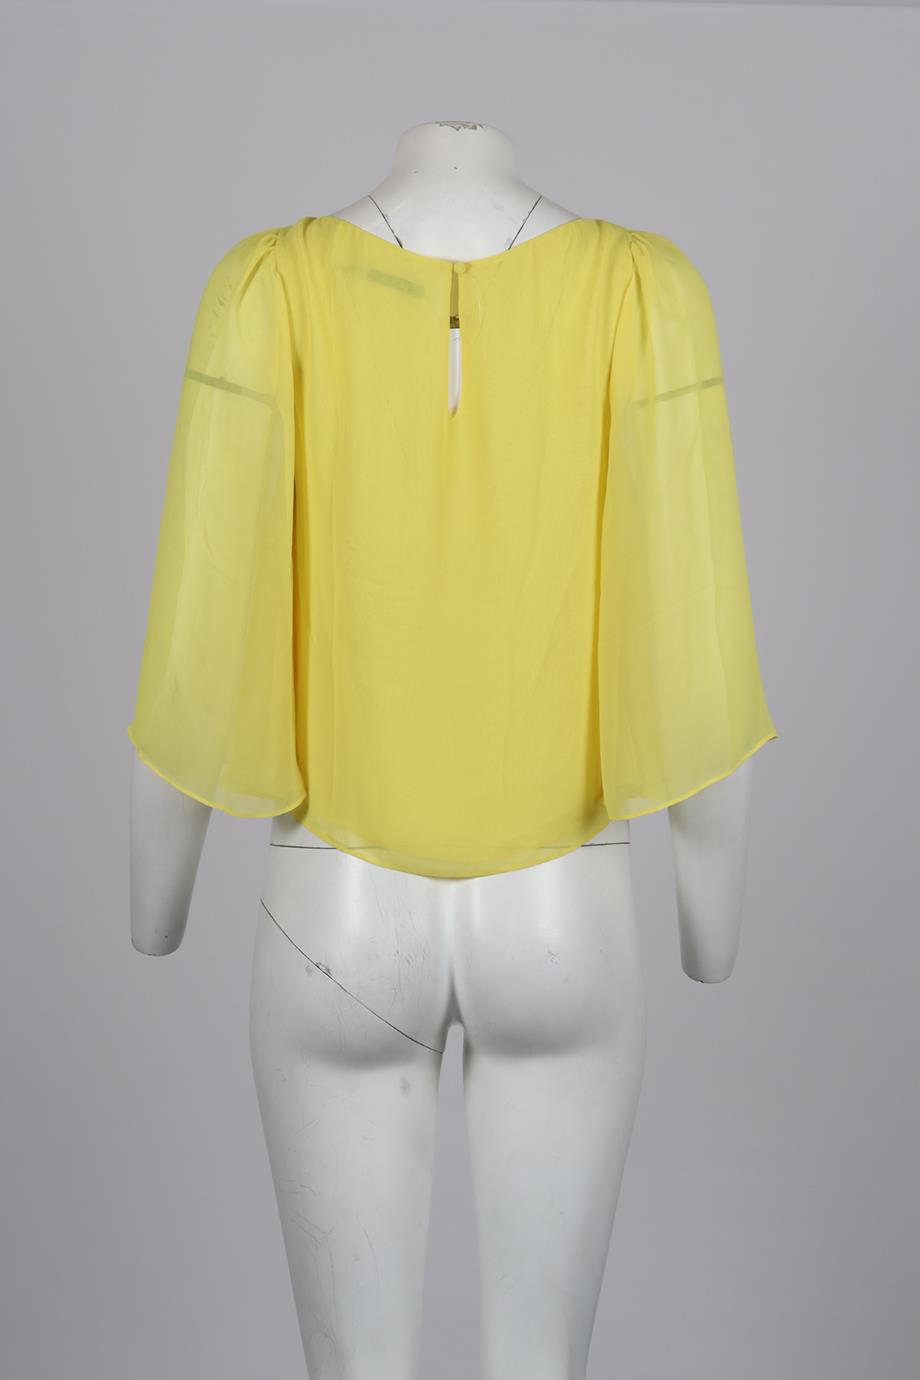 ALICE AND OLIVIA CREPE TOP XSMALL